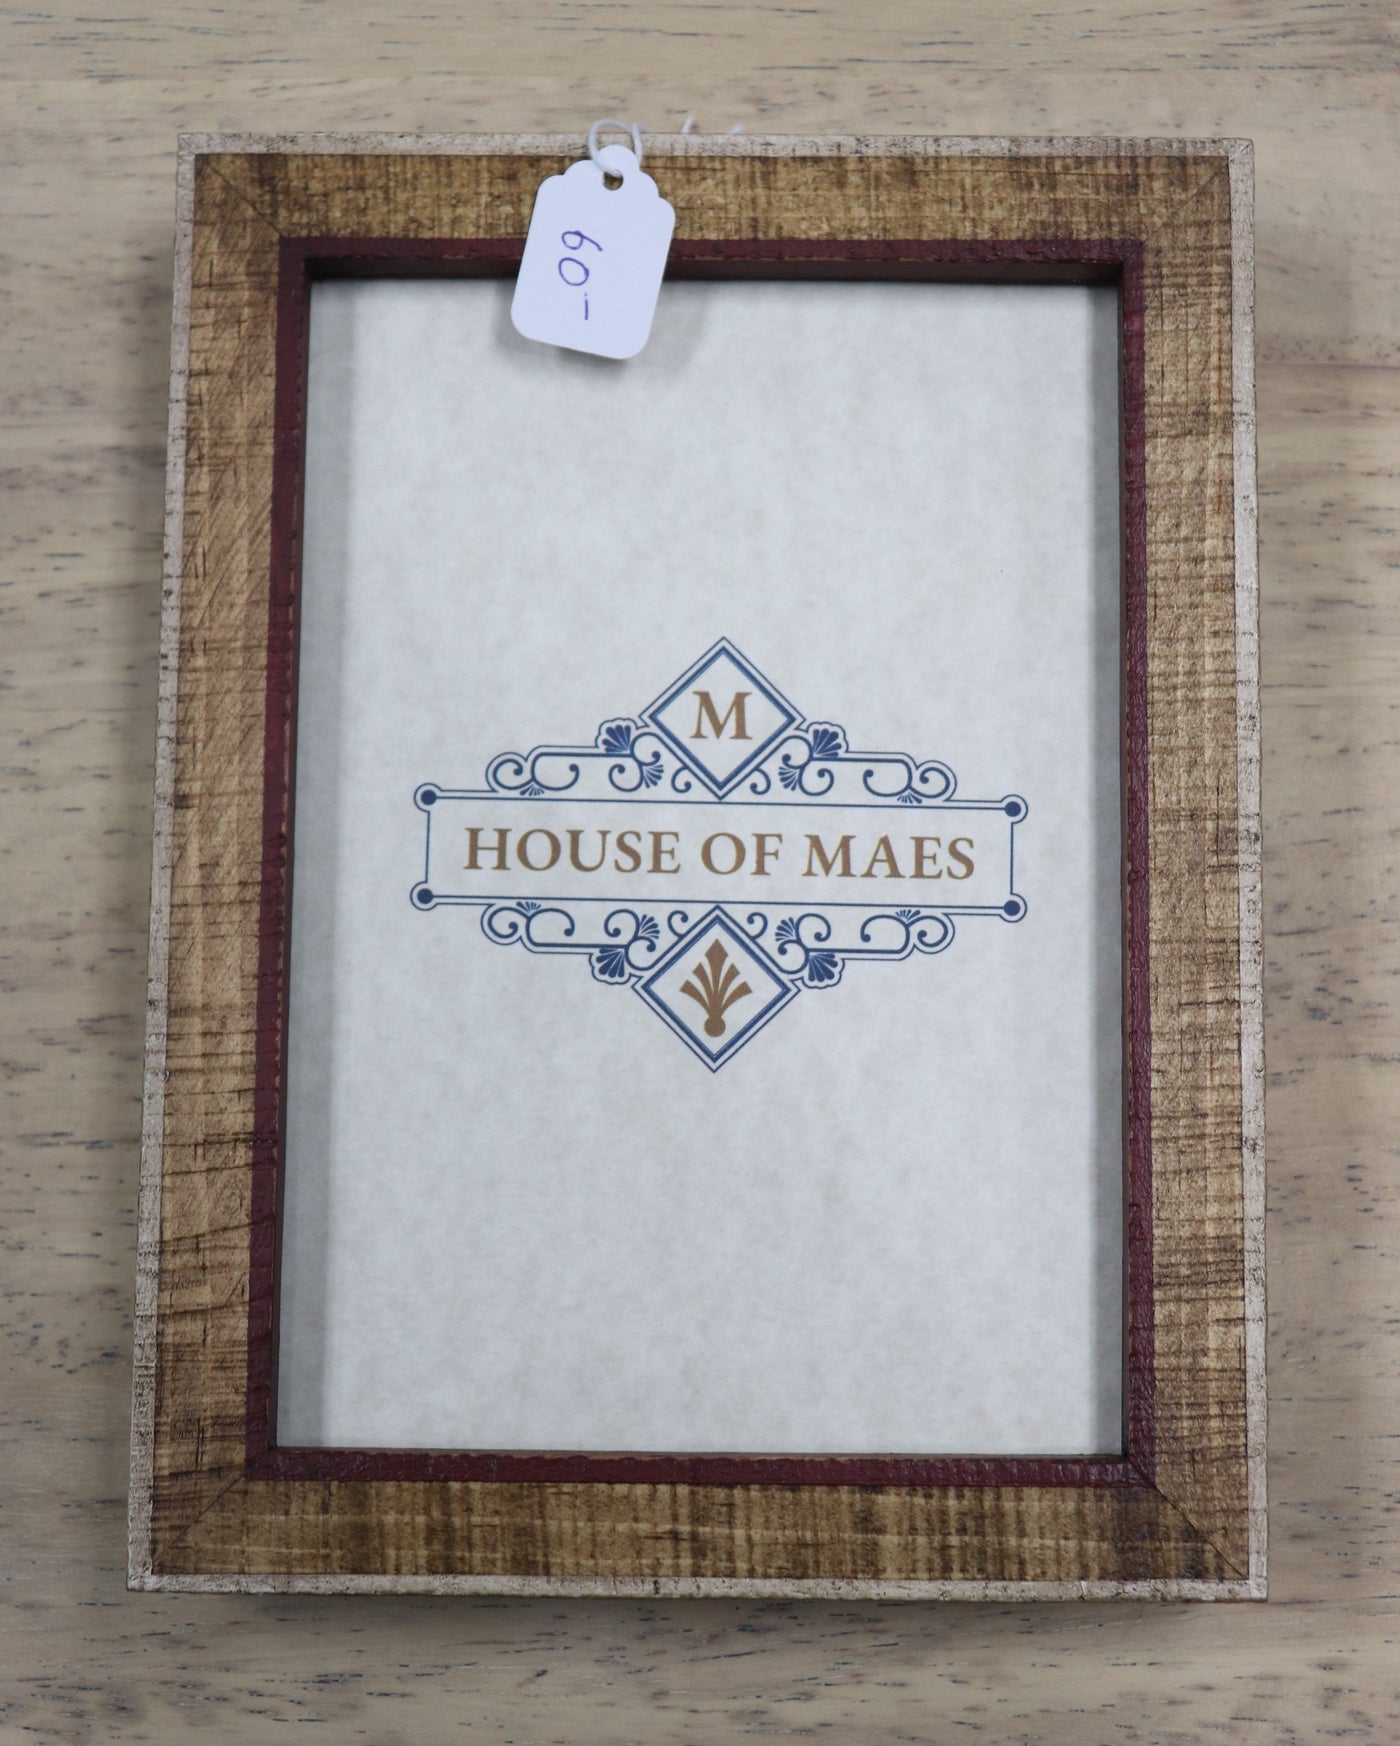 5" x 7" Red/White Museum Glass Photo Frame- House of Maes